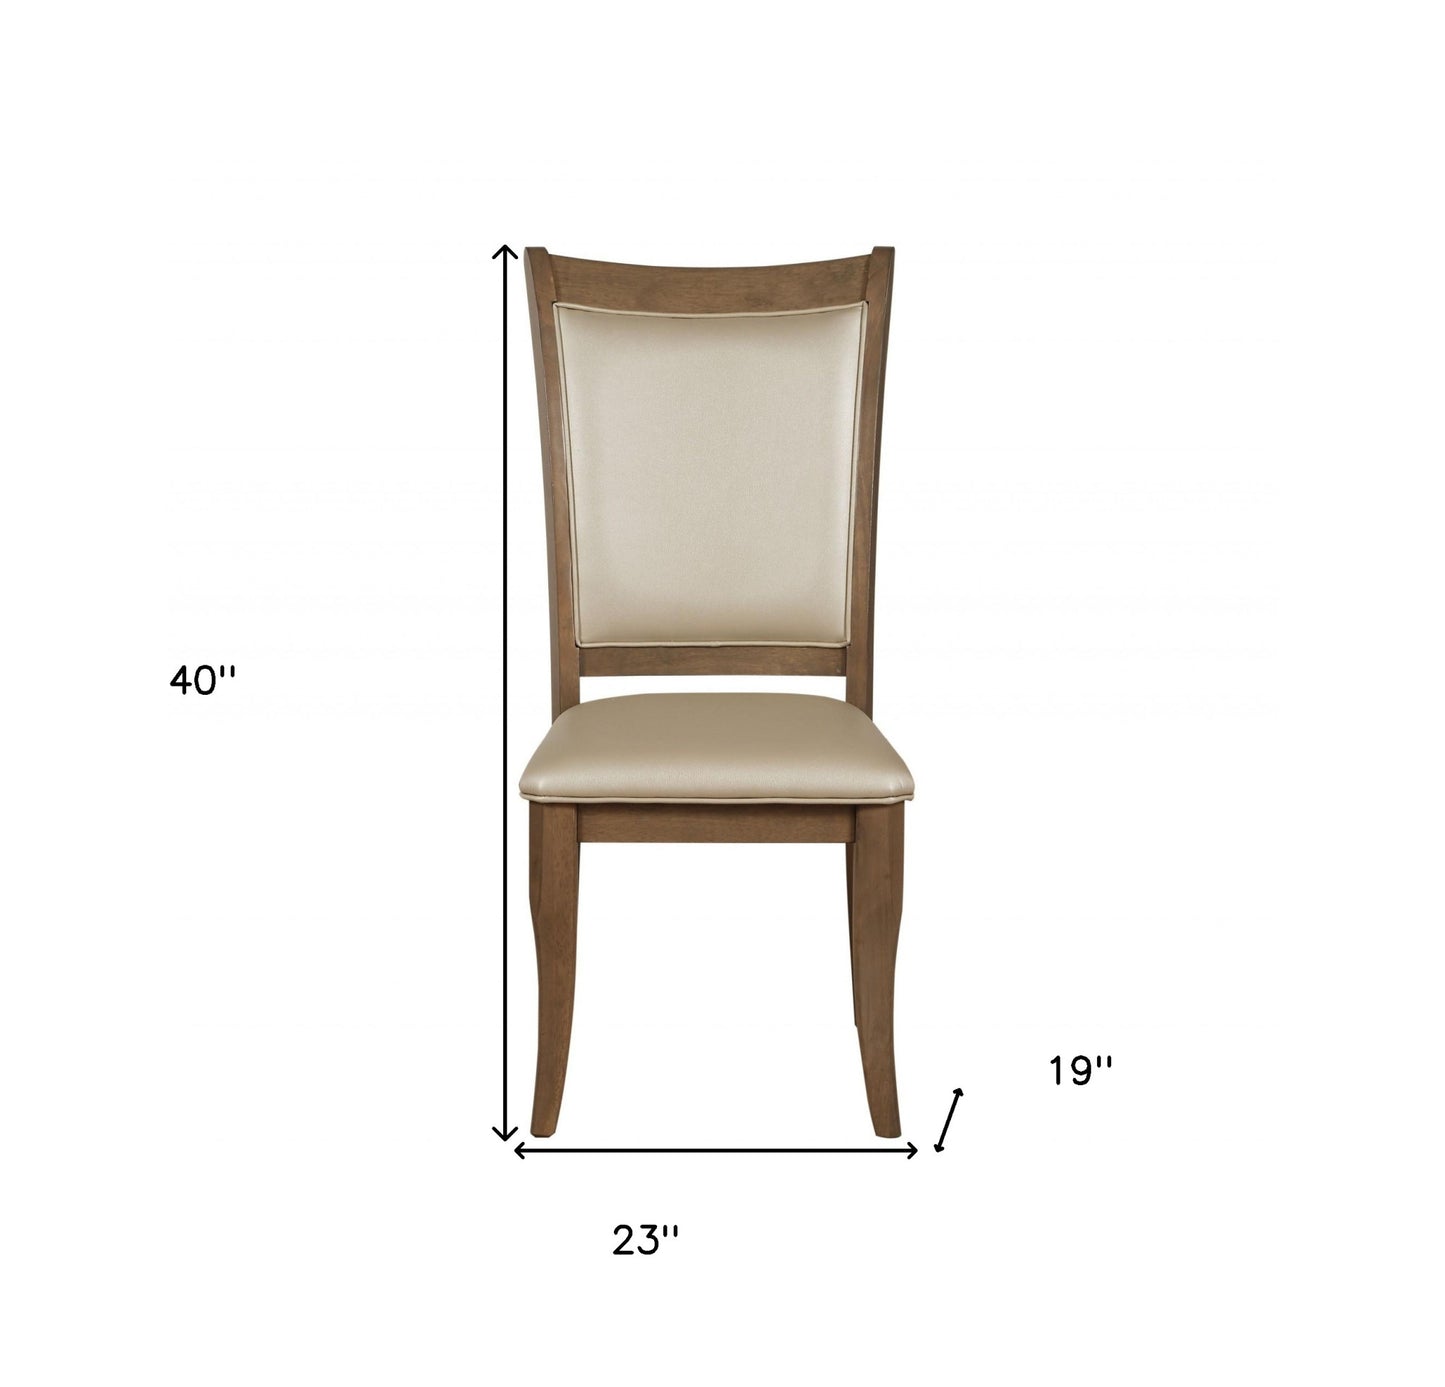 Set of Two Beige And Brown Upholstered Faux Leather Open Back Dining Side Chairs